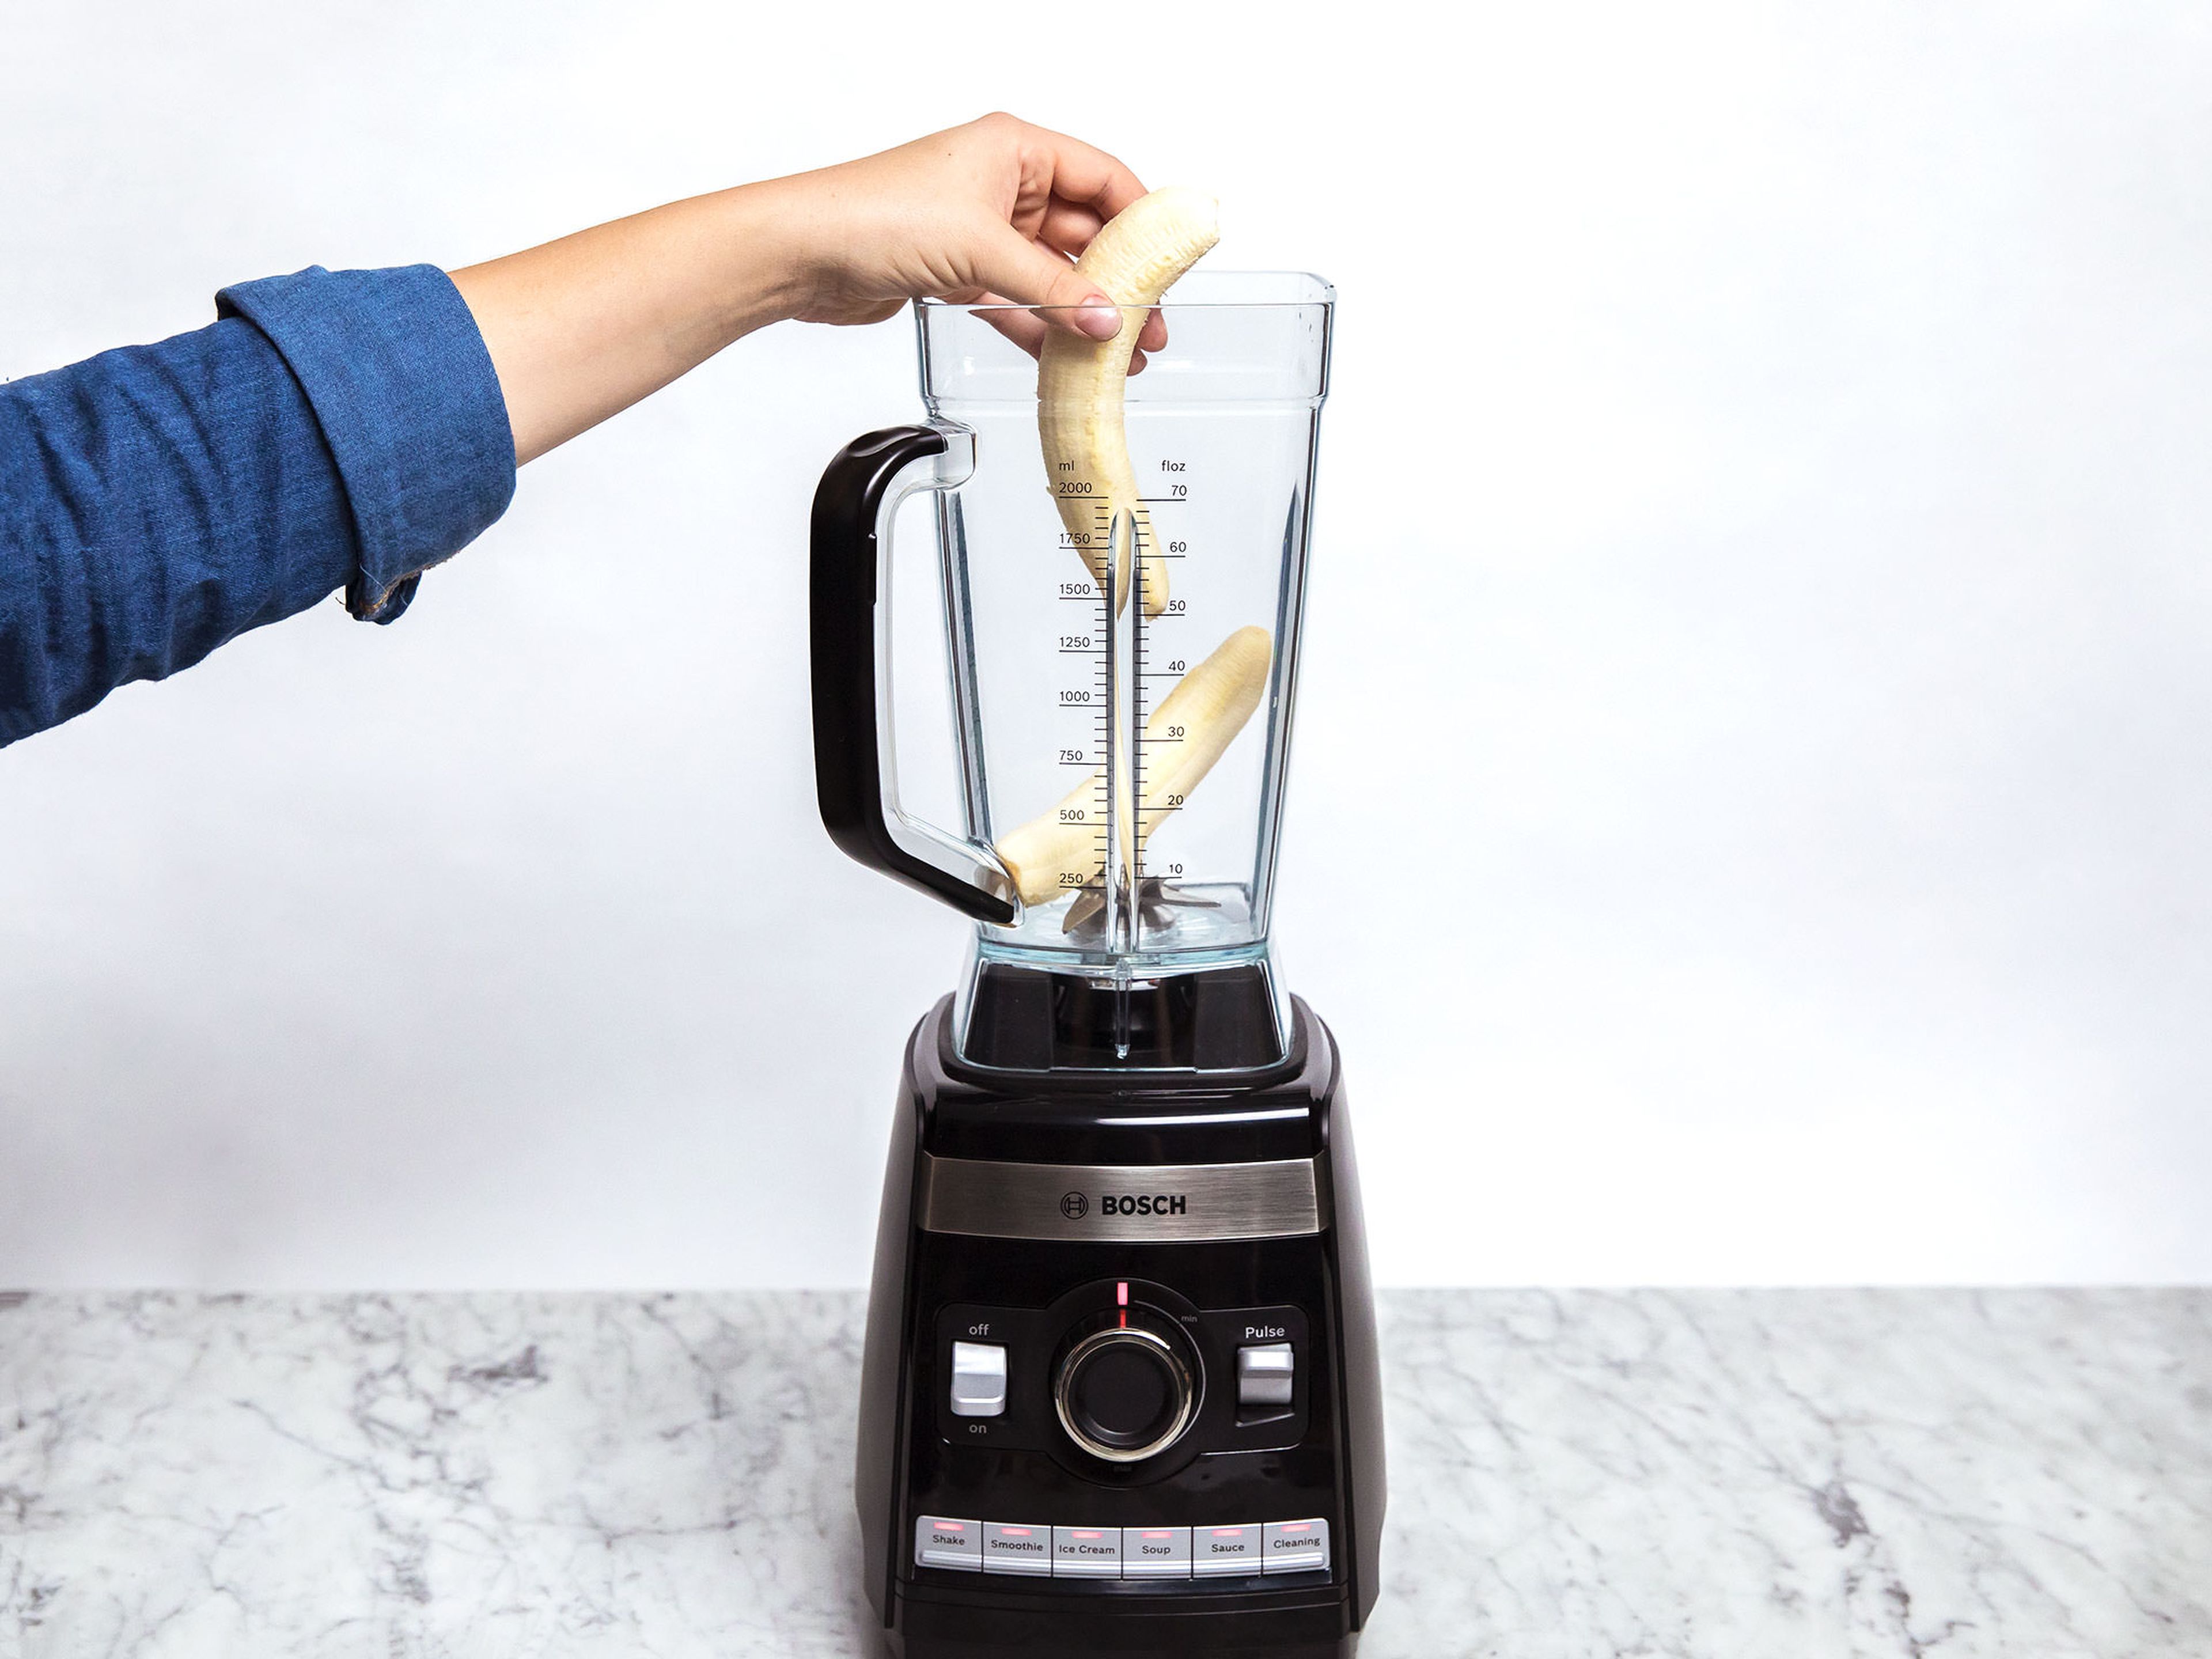 Peel the bananas and add to the blender.